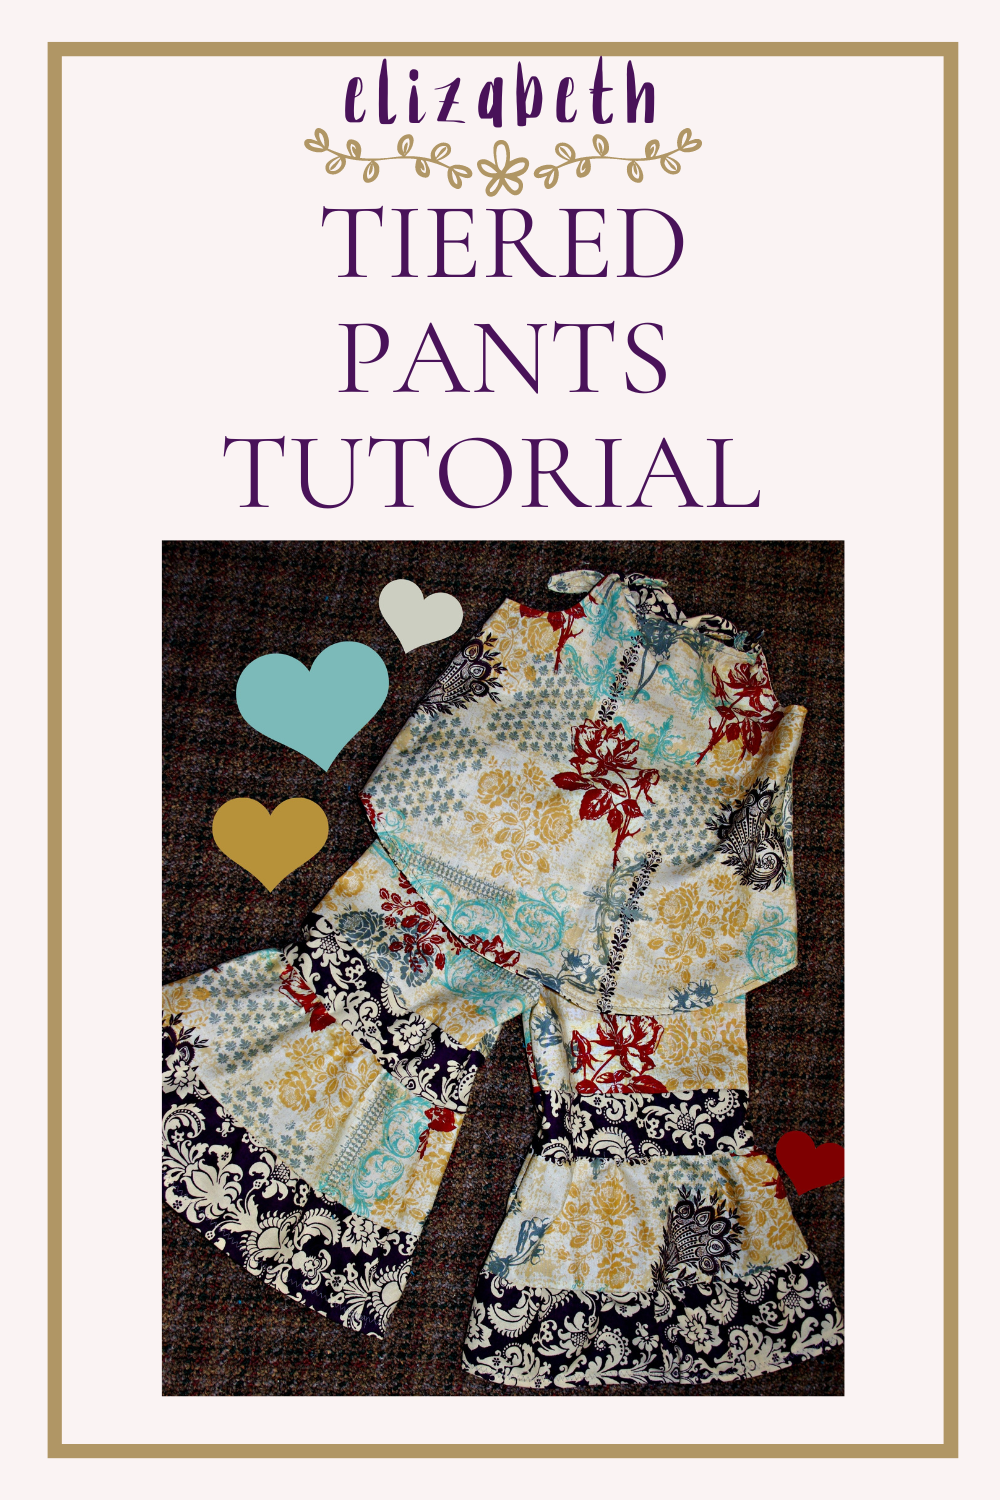 Elizabeth Tiered Pants Tutorial title above picture of finished tiered pants with matching smock.